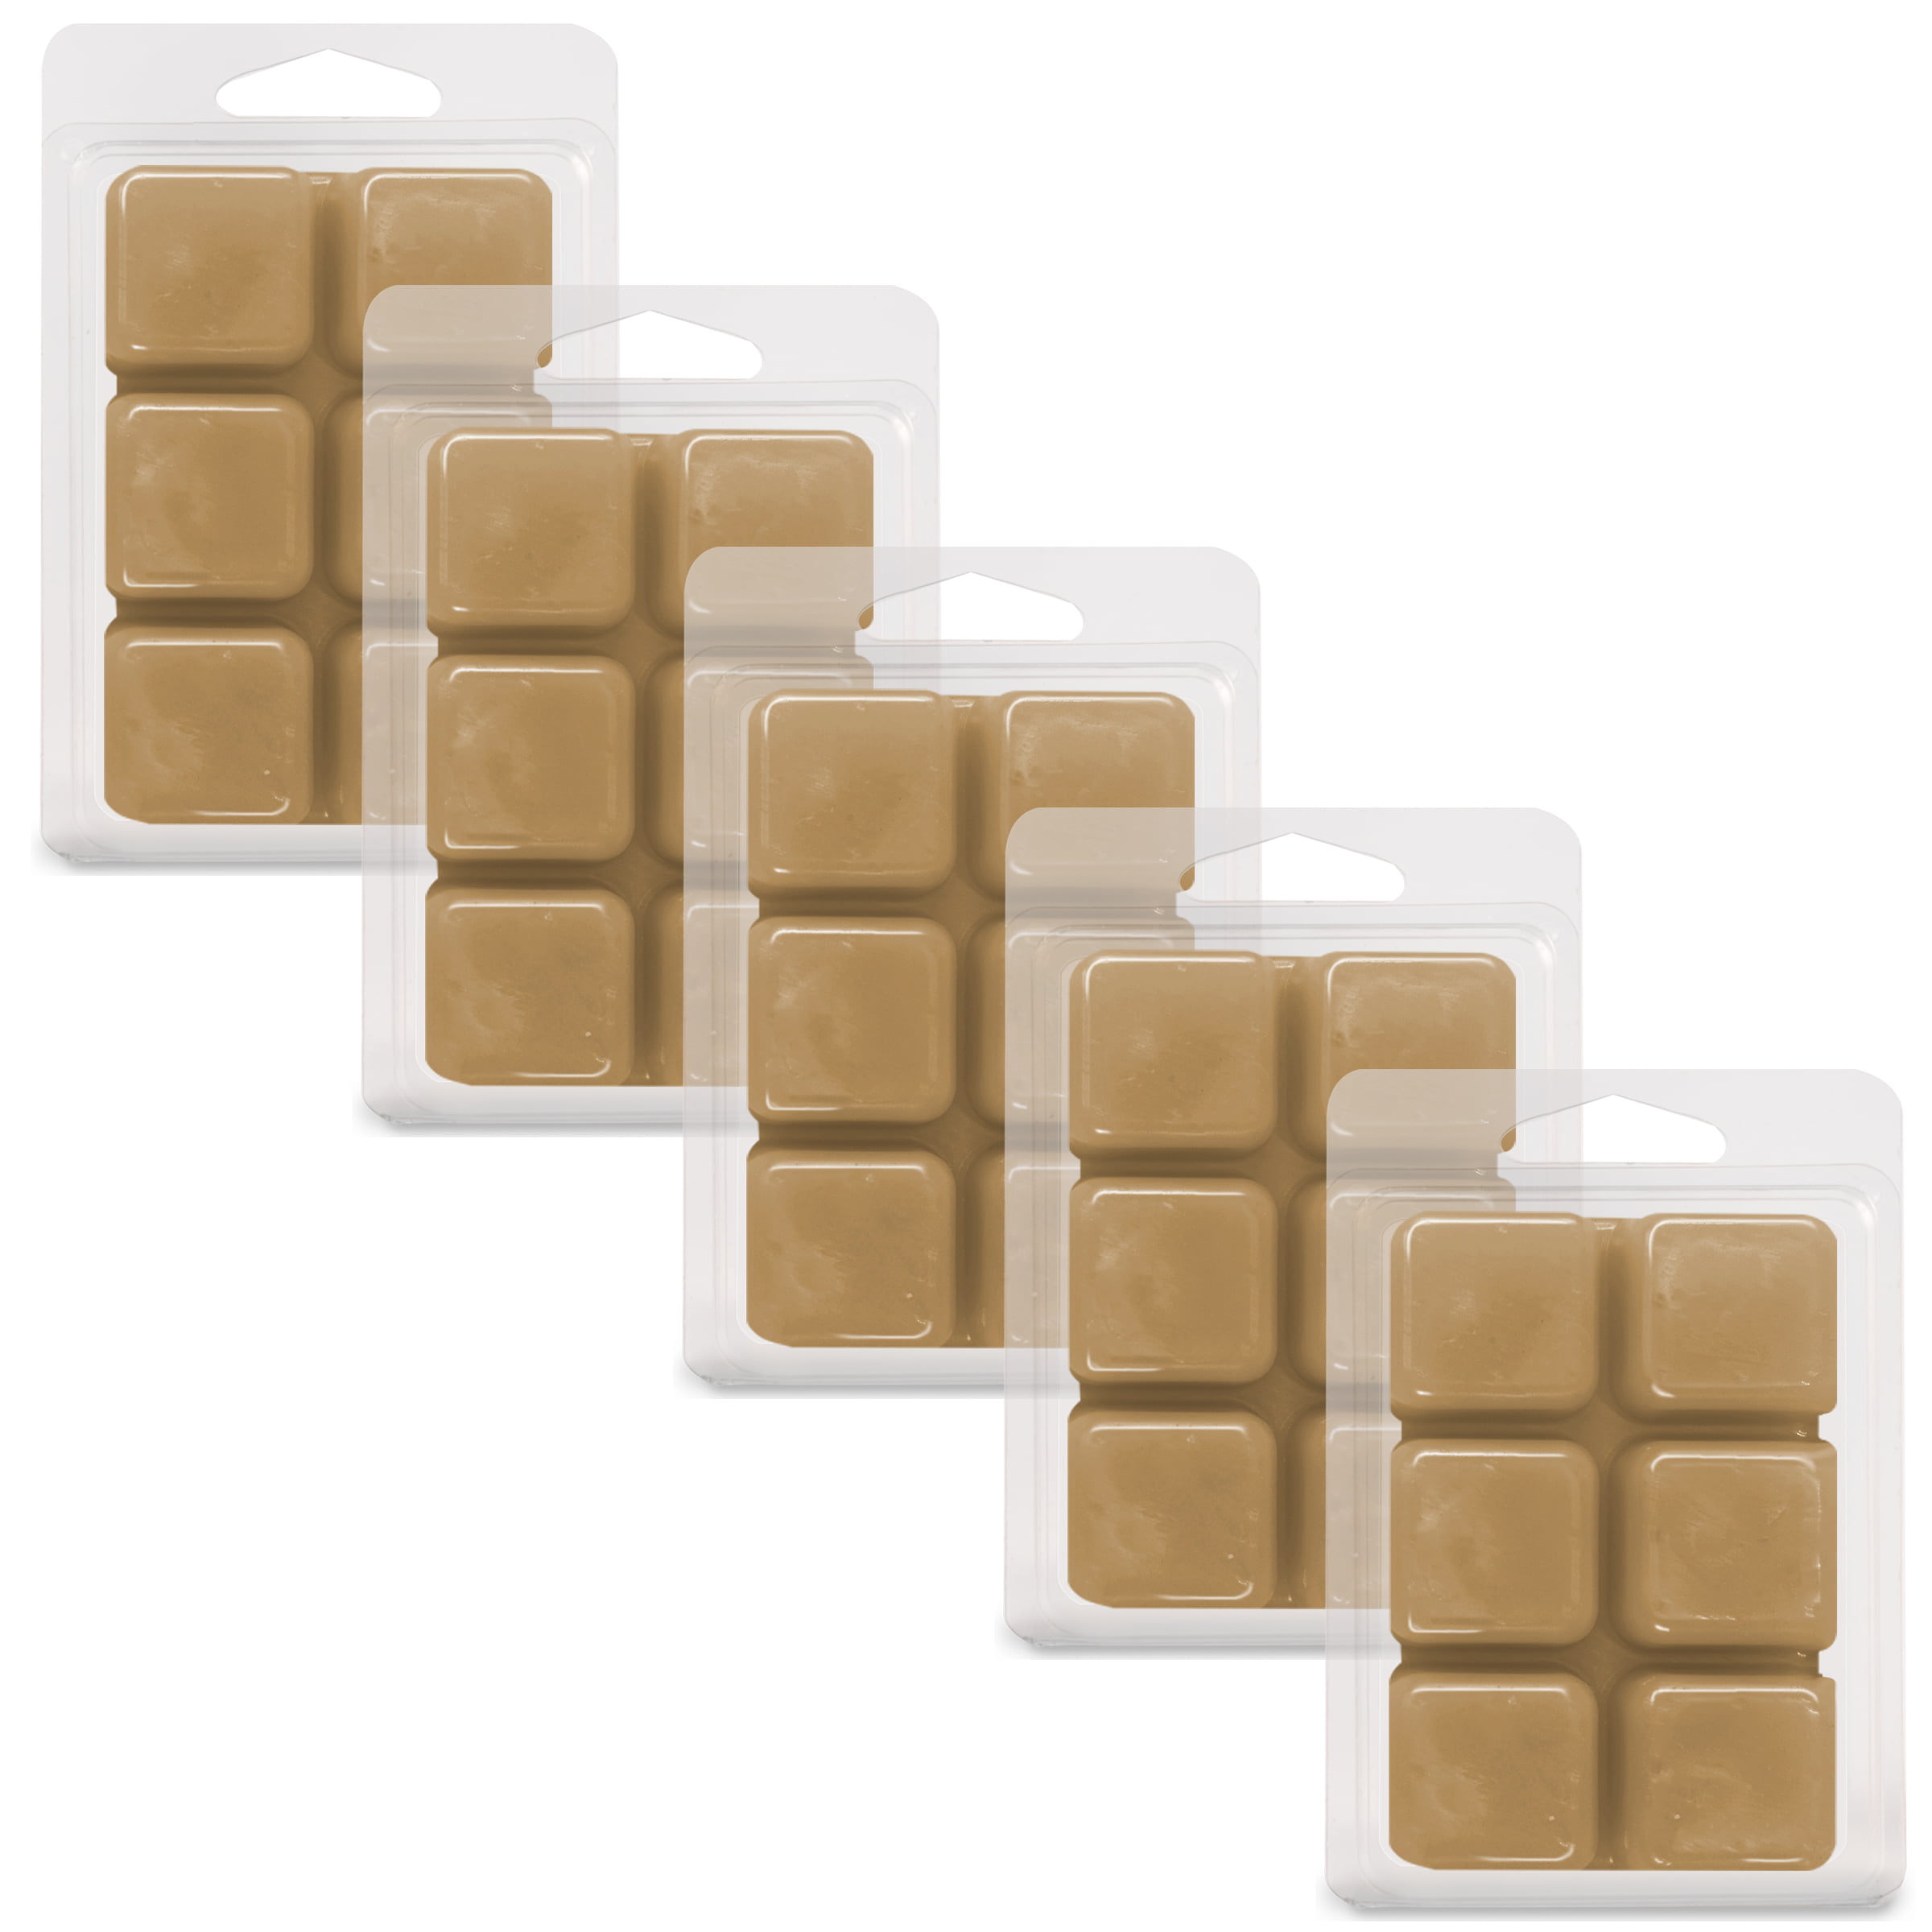 Island Coconut Creamsicle Scented Wax Melts, Better Homes & Gardens, 2.5 oz (5-Pack), Beige